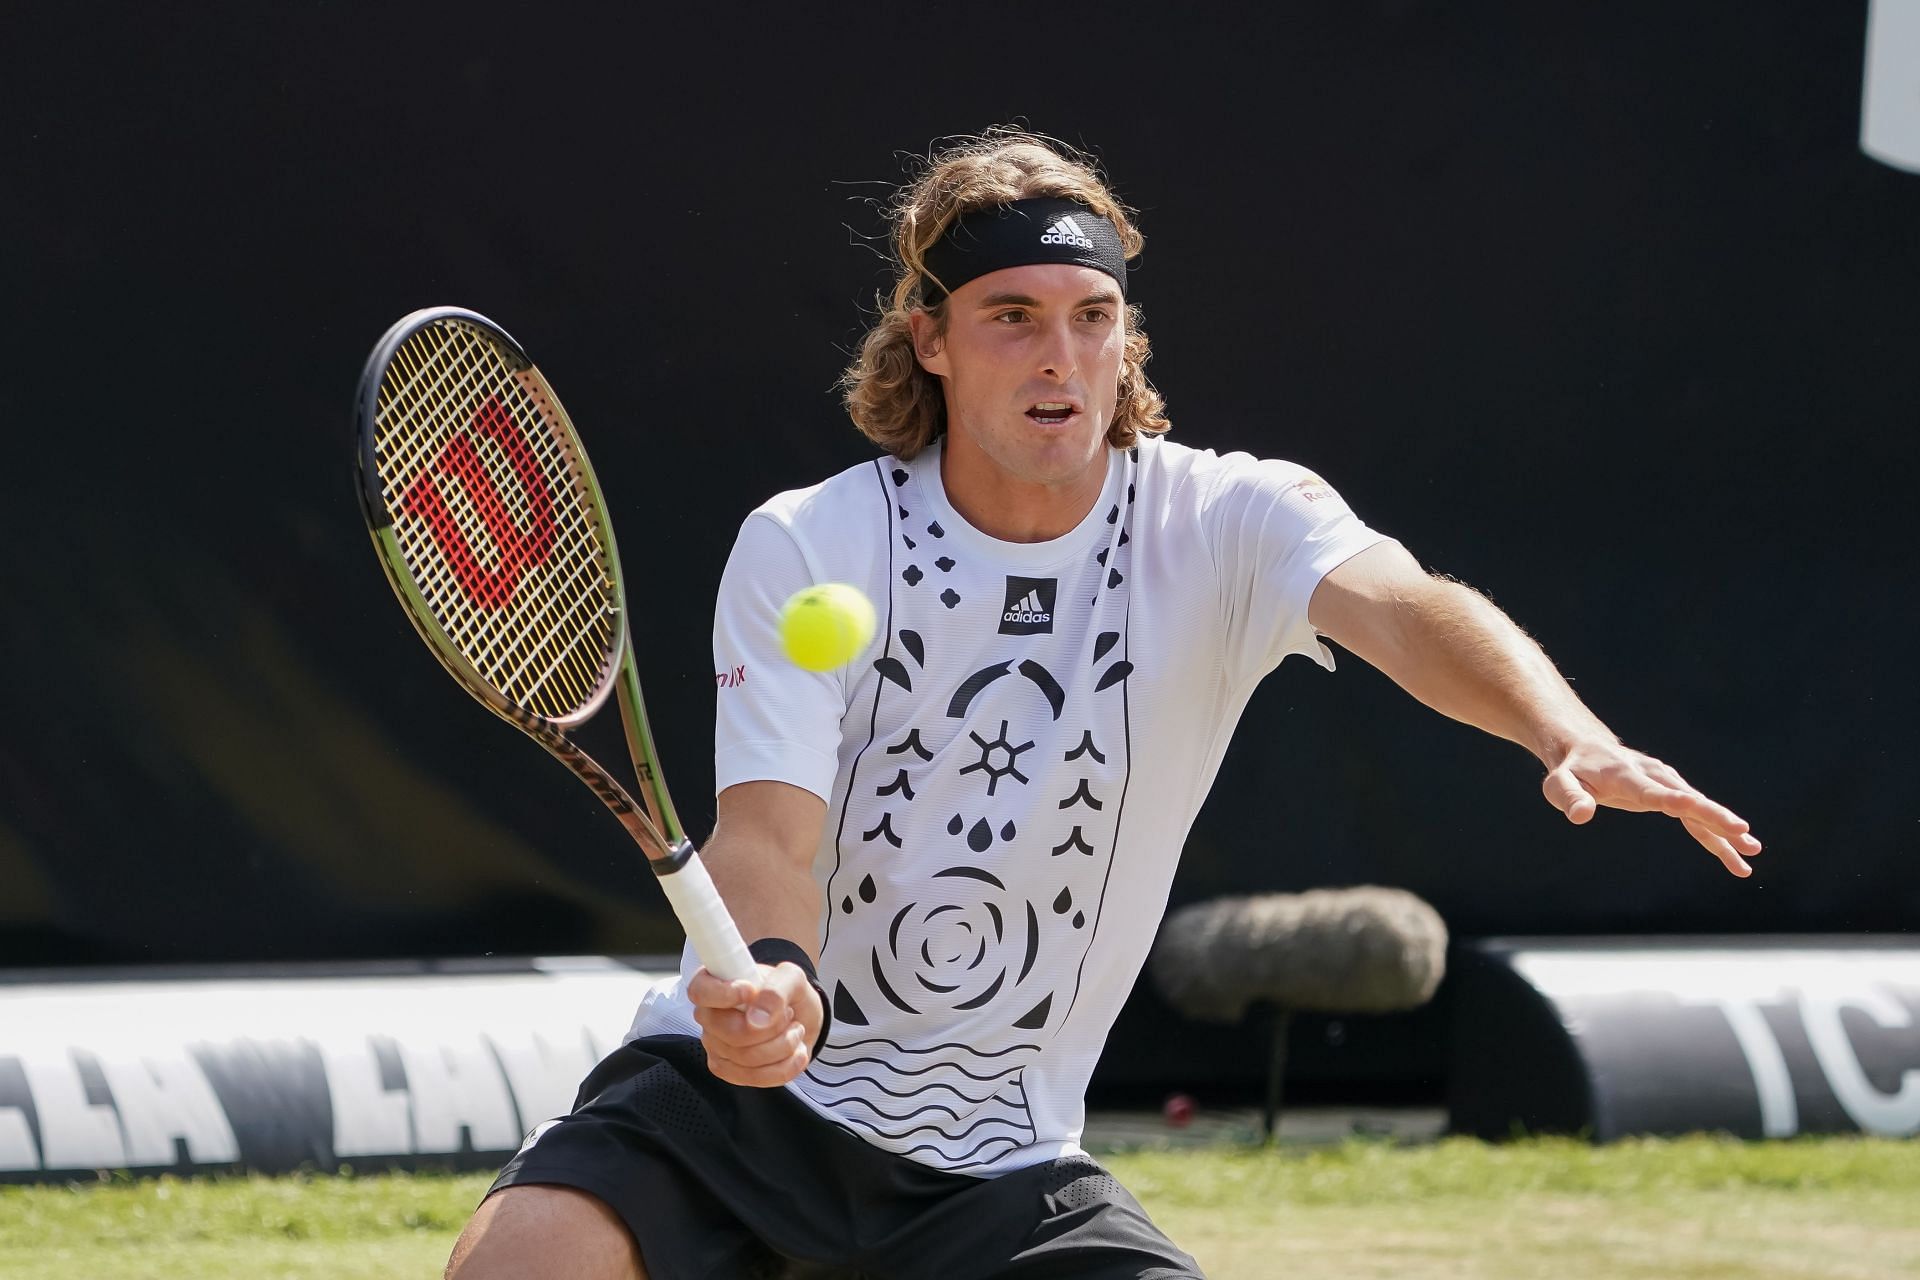 Stefanos Tsitsipas is the second seed at the Mallorca Open